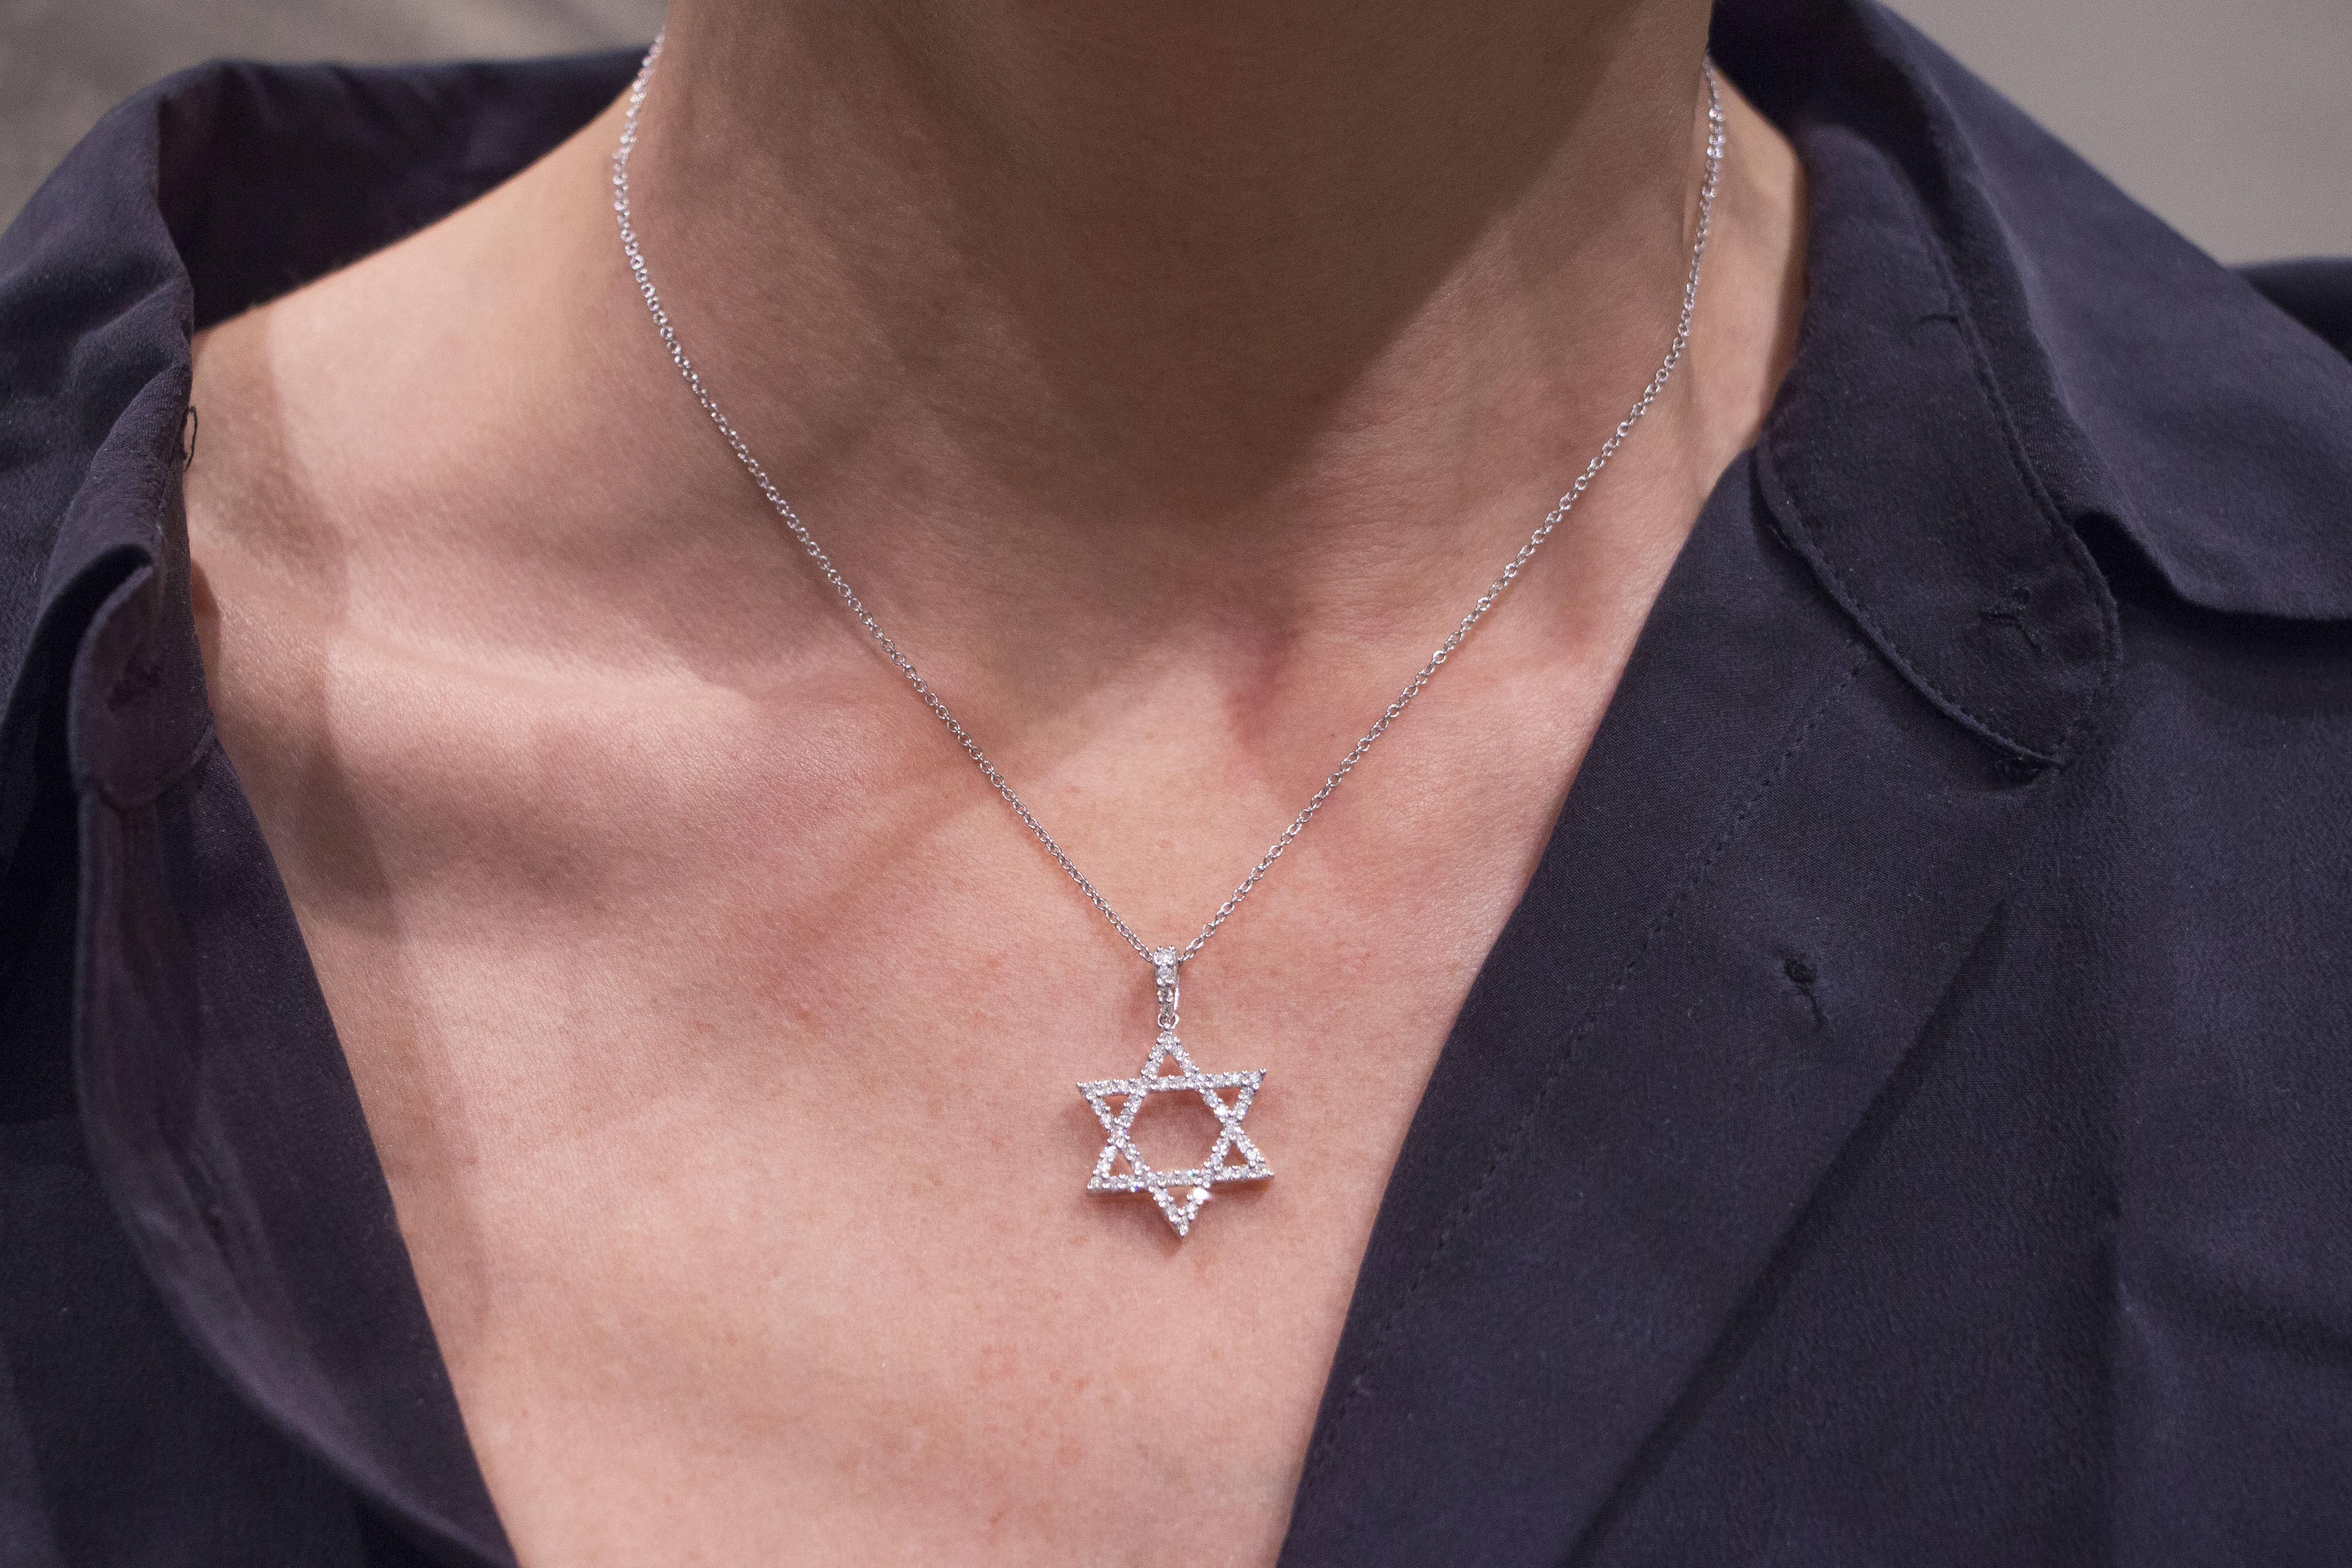 Jona design collection, hand crafted in Italy, 18 karat white gold Magen David pendant, set with 0.52 carats of white diamonds, suspended by a 18 karat white gold chain necklace 16.5 inch long(also available in other lengths).Dimensions: 0.78 in